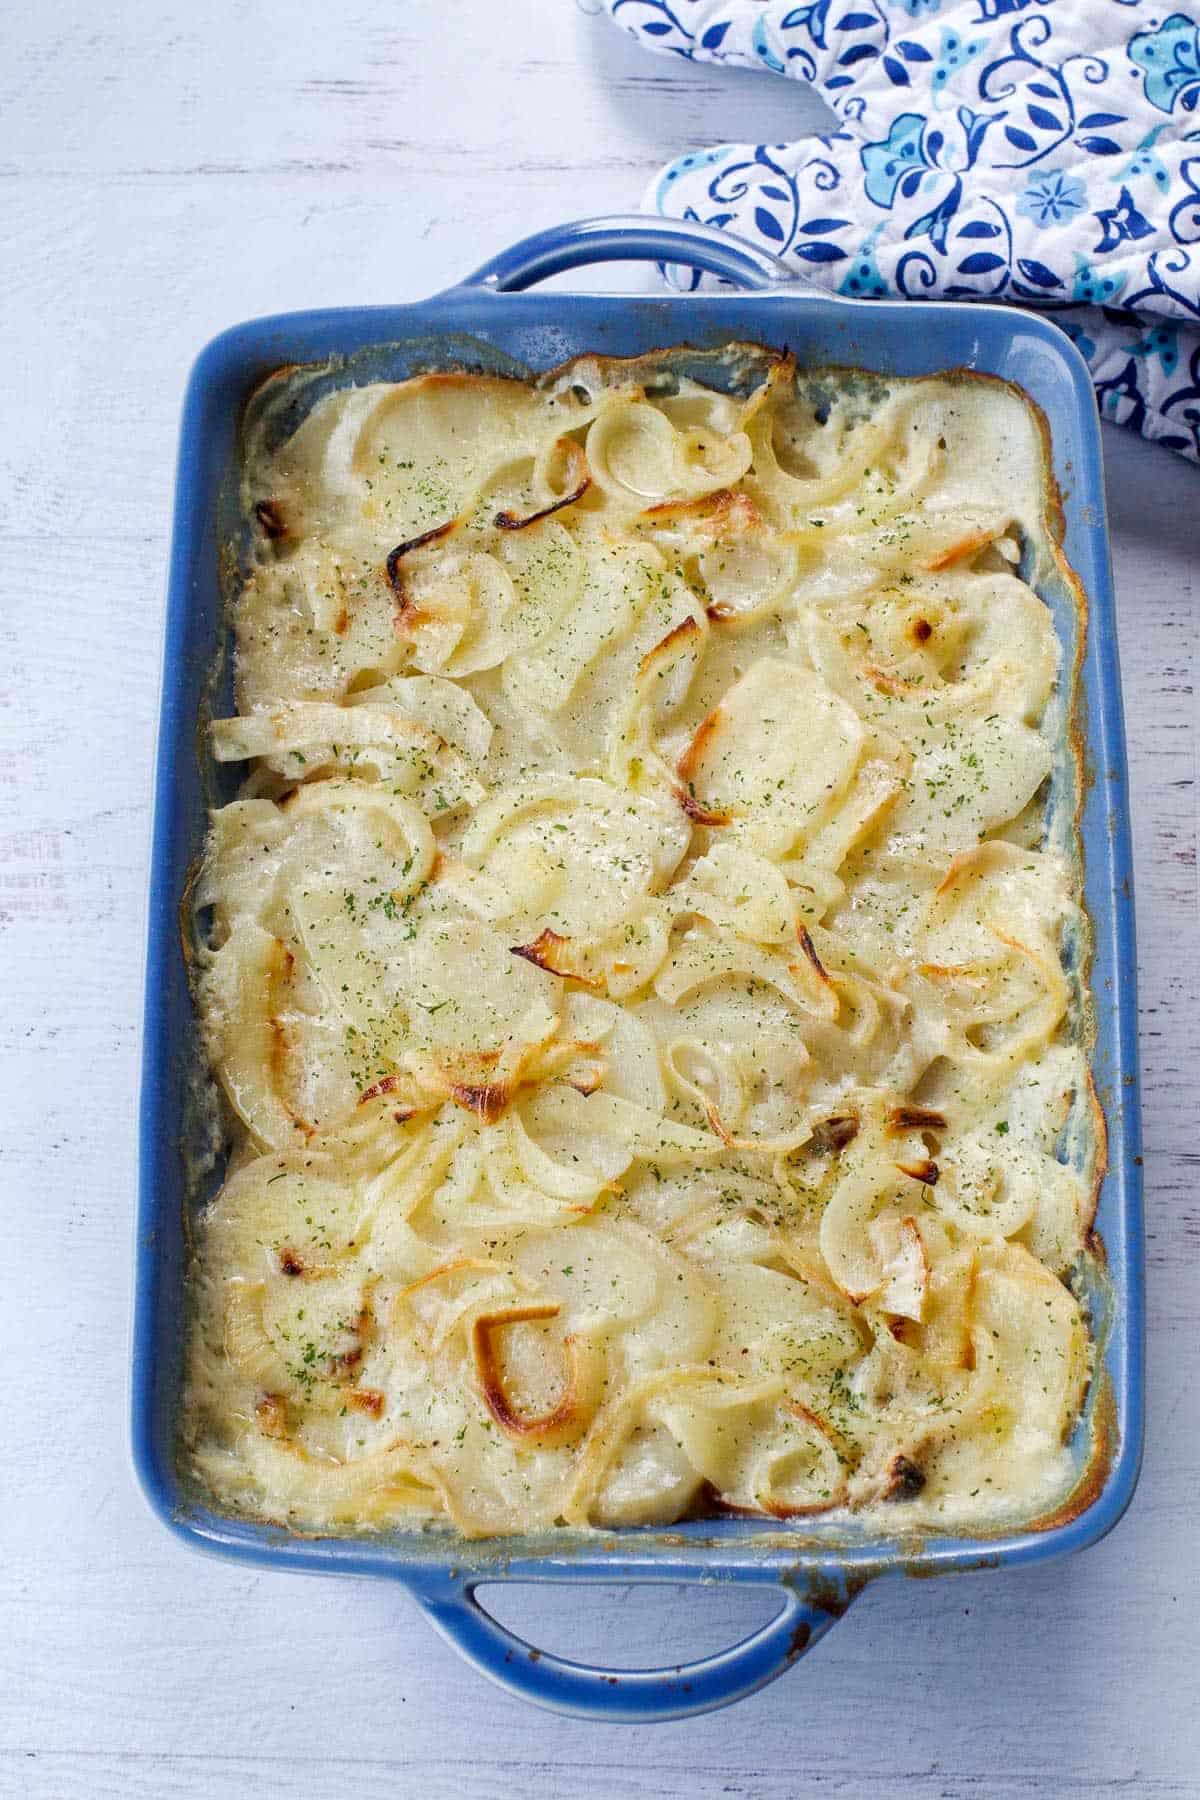 Homemade scalloped potatoes in blue casserole dish with blue patterned oven mitts